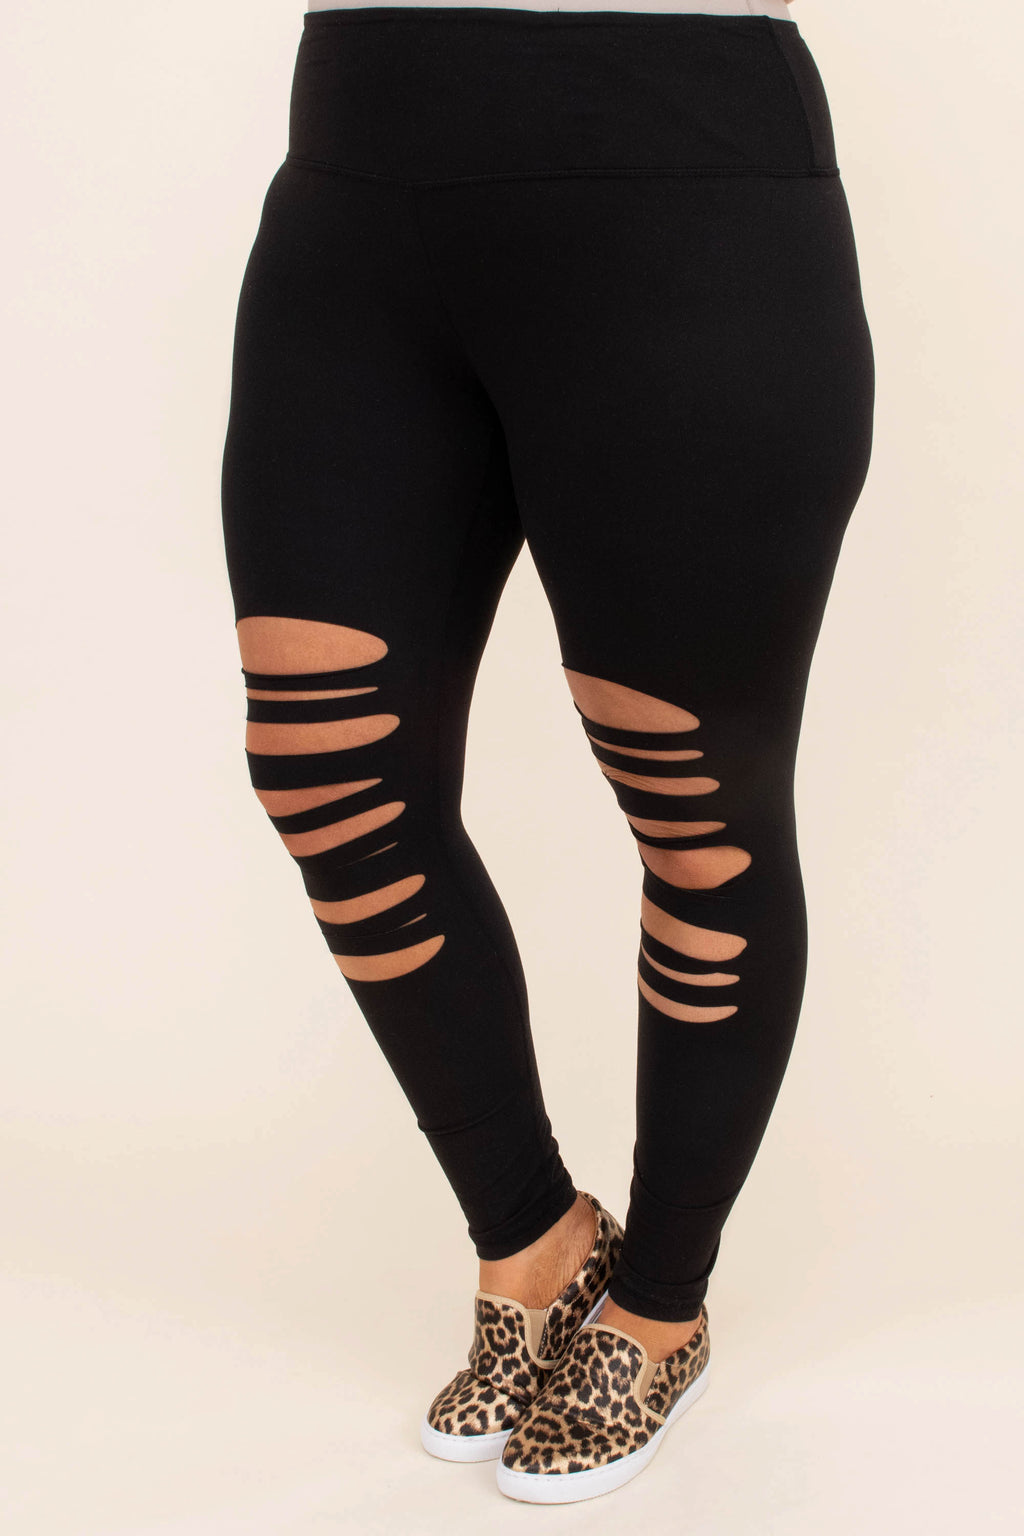 Latest Street Fashion Black Cut Out Skinny Poly Spandex Fabric Legging  Tights for high Compression Sports Yoga Gym and Activewear : Amazon.in:  Fashion